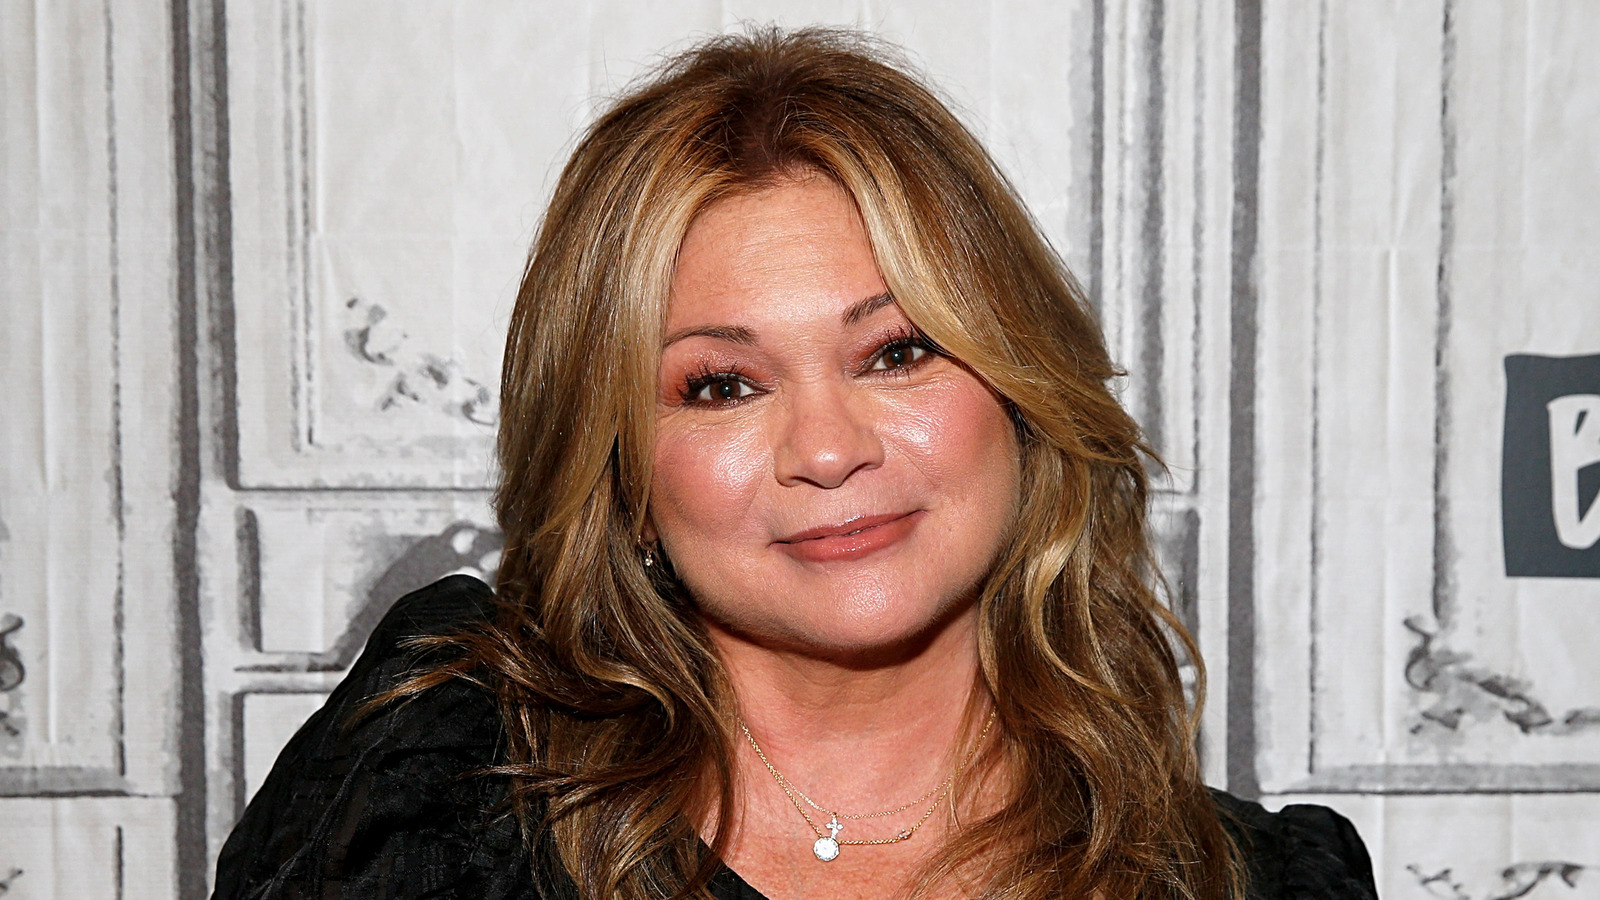 A Look At Valerie Bertinelli's Weight Loss Transformation Over The Years